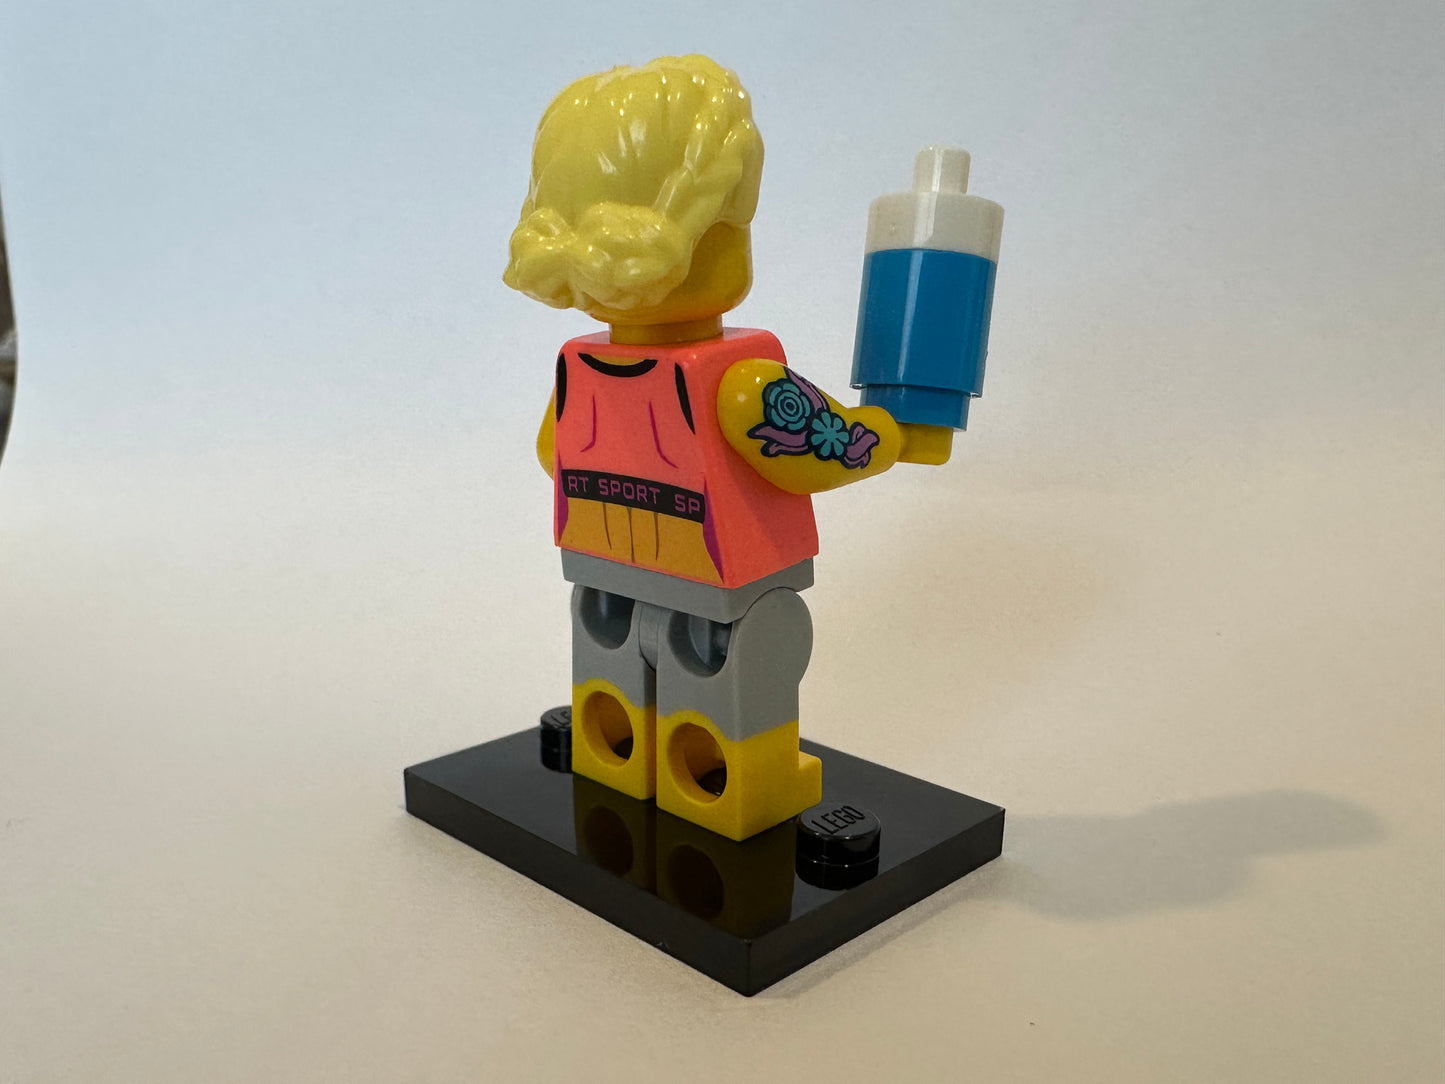 Lego Minifigures Series 25 Fitness Instructor